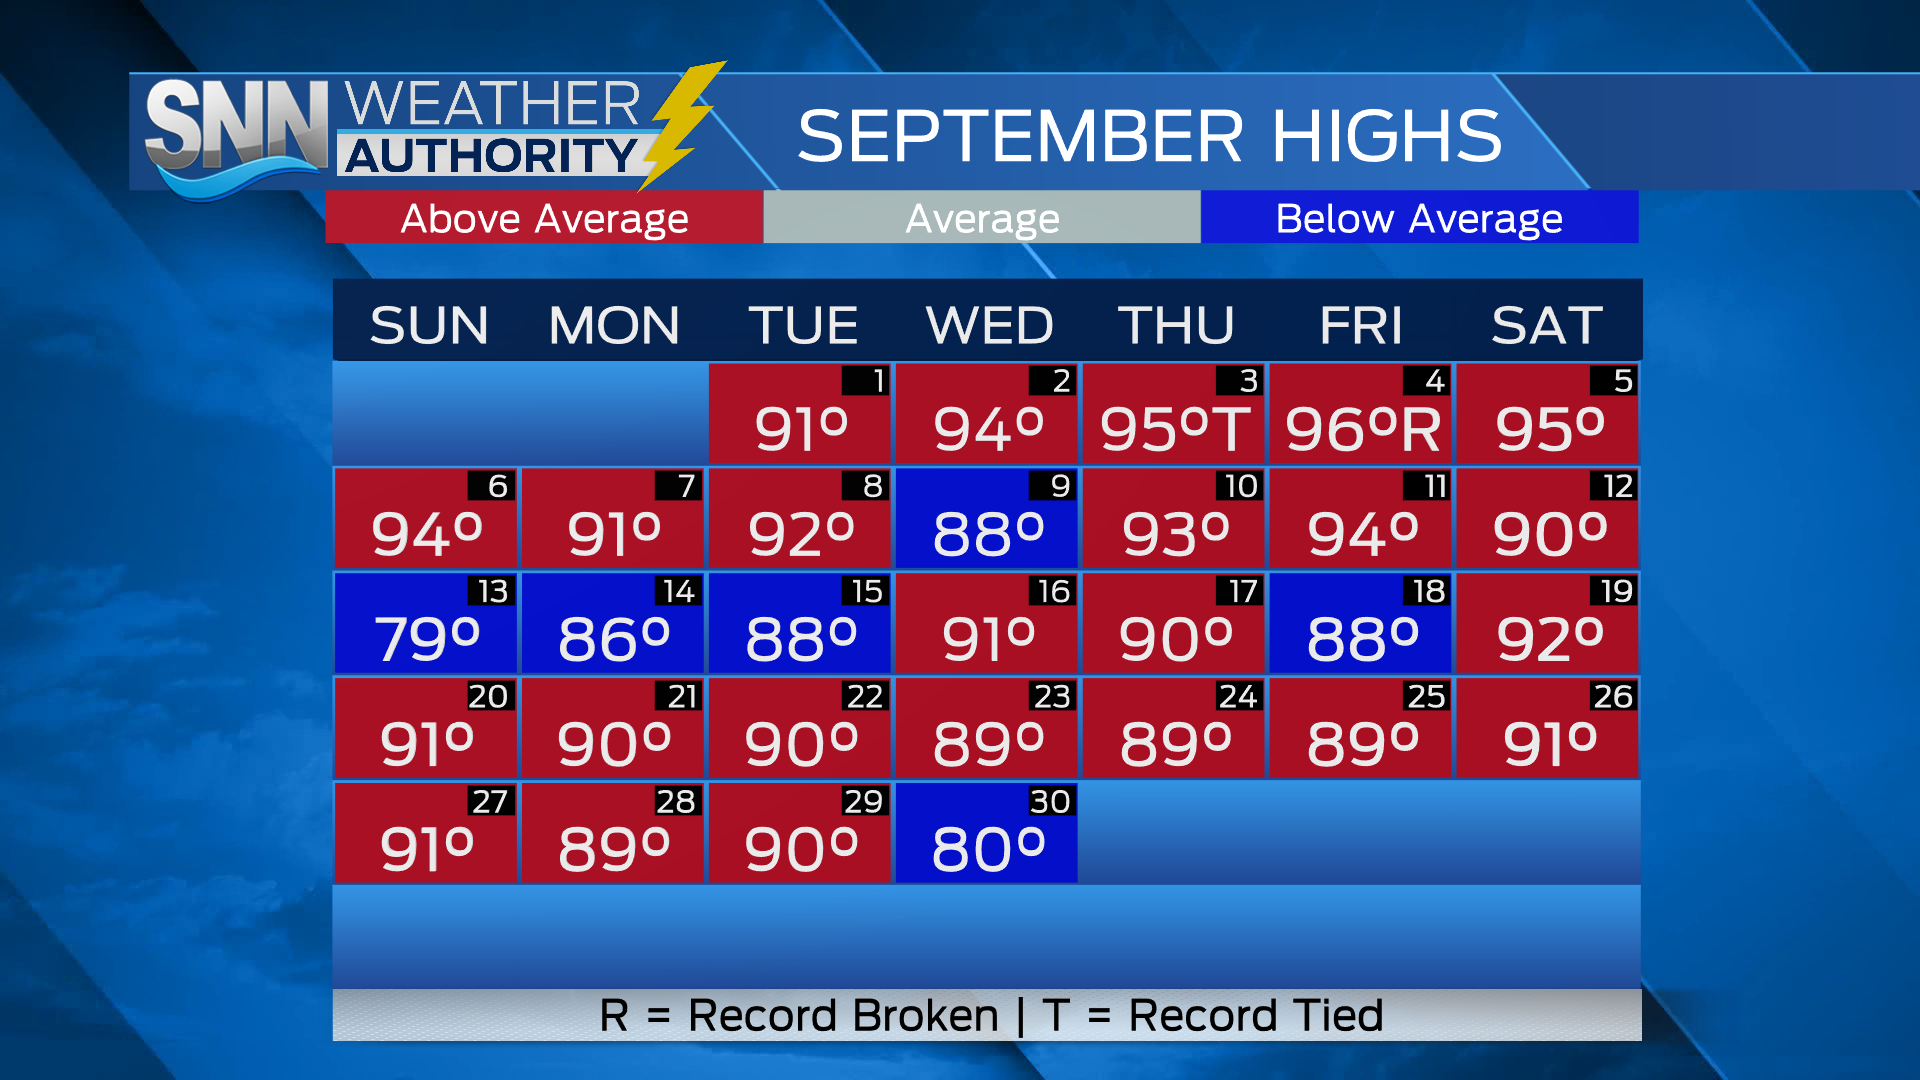 Highs recorded at SRQ in September.